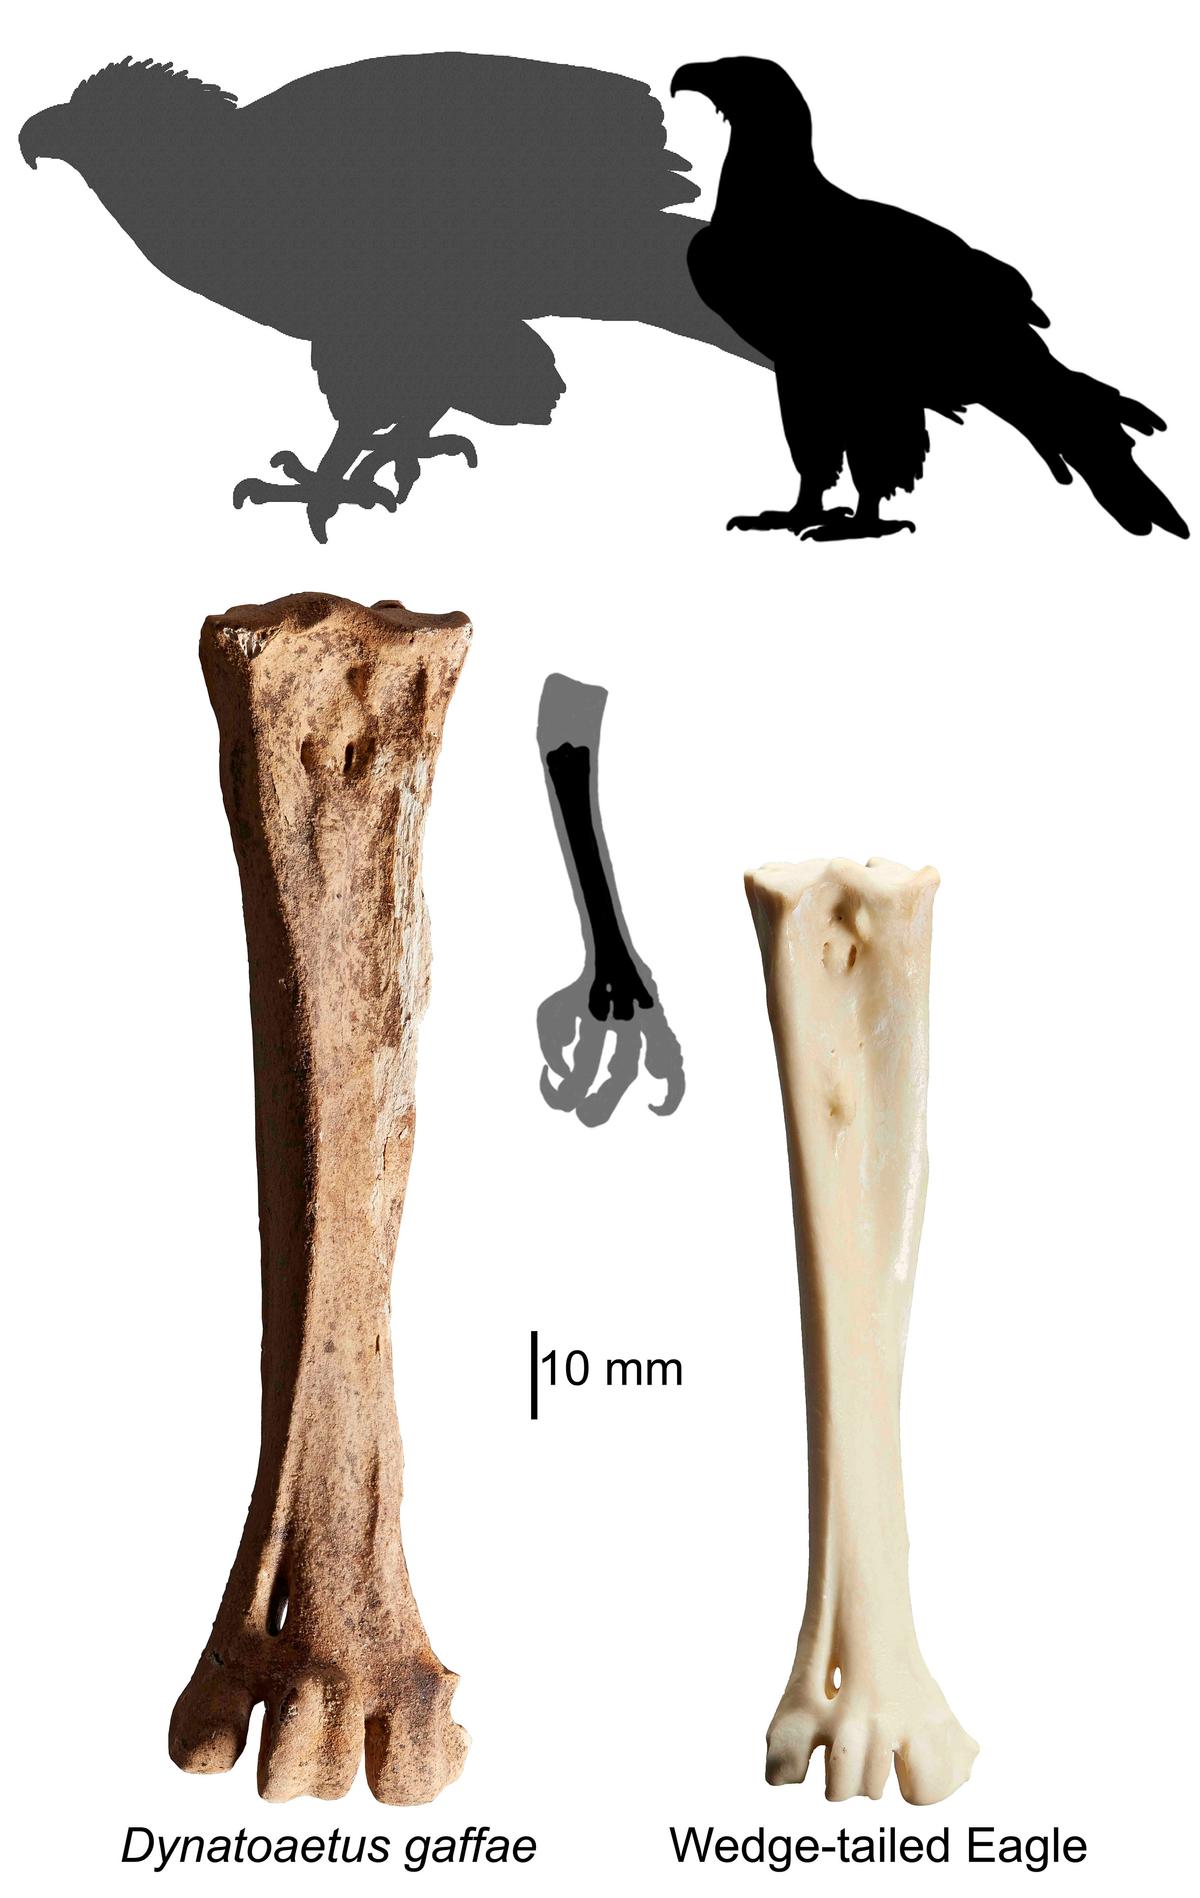 A size comparison of today's wedge-tailed eagle and the now-extinct dynatoaetus, based on fossil sizes. (Courtesy of Ellen Mather)